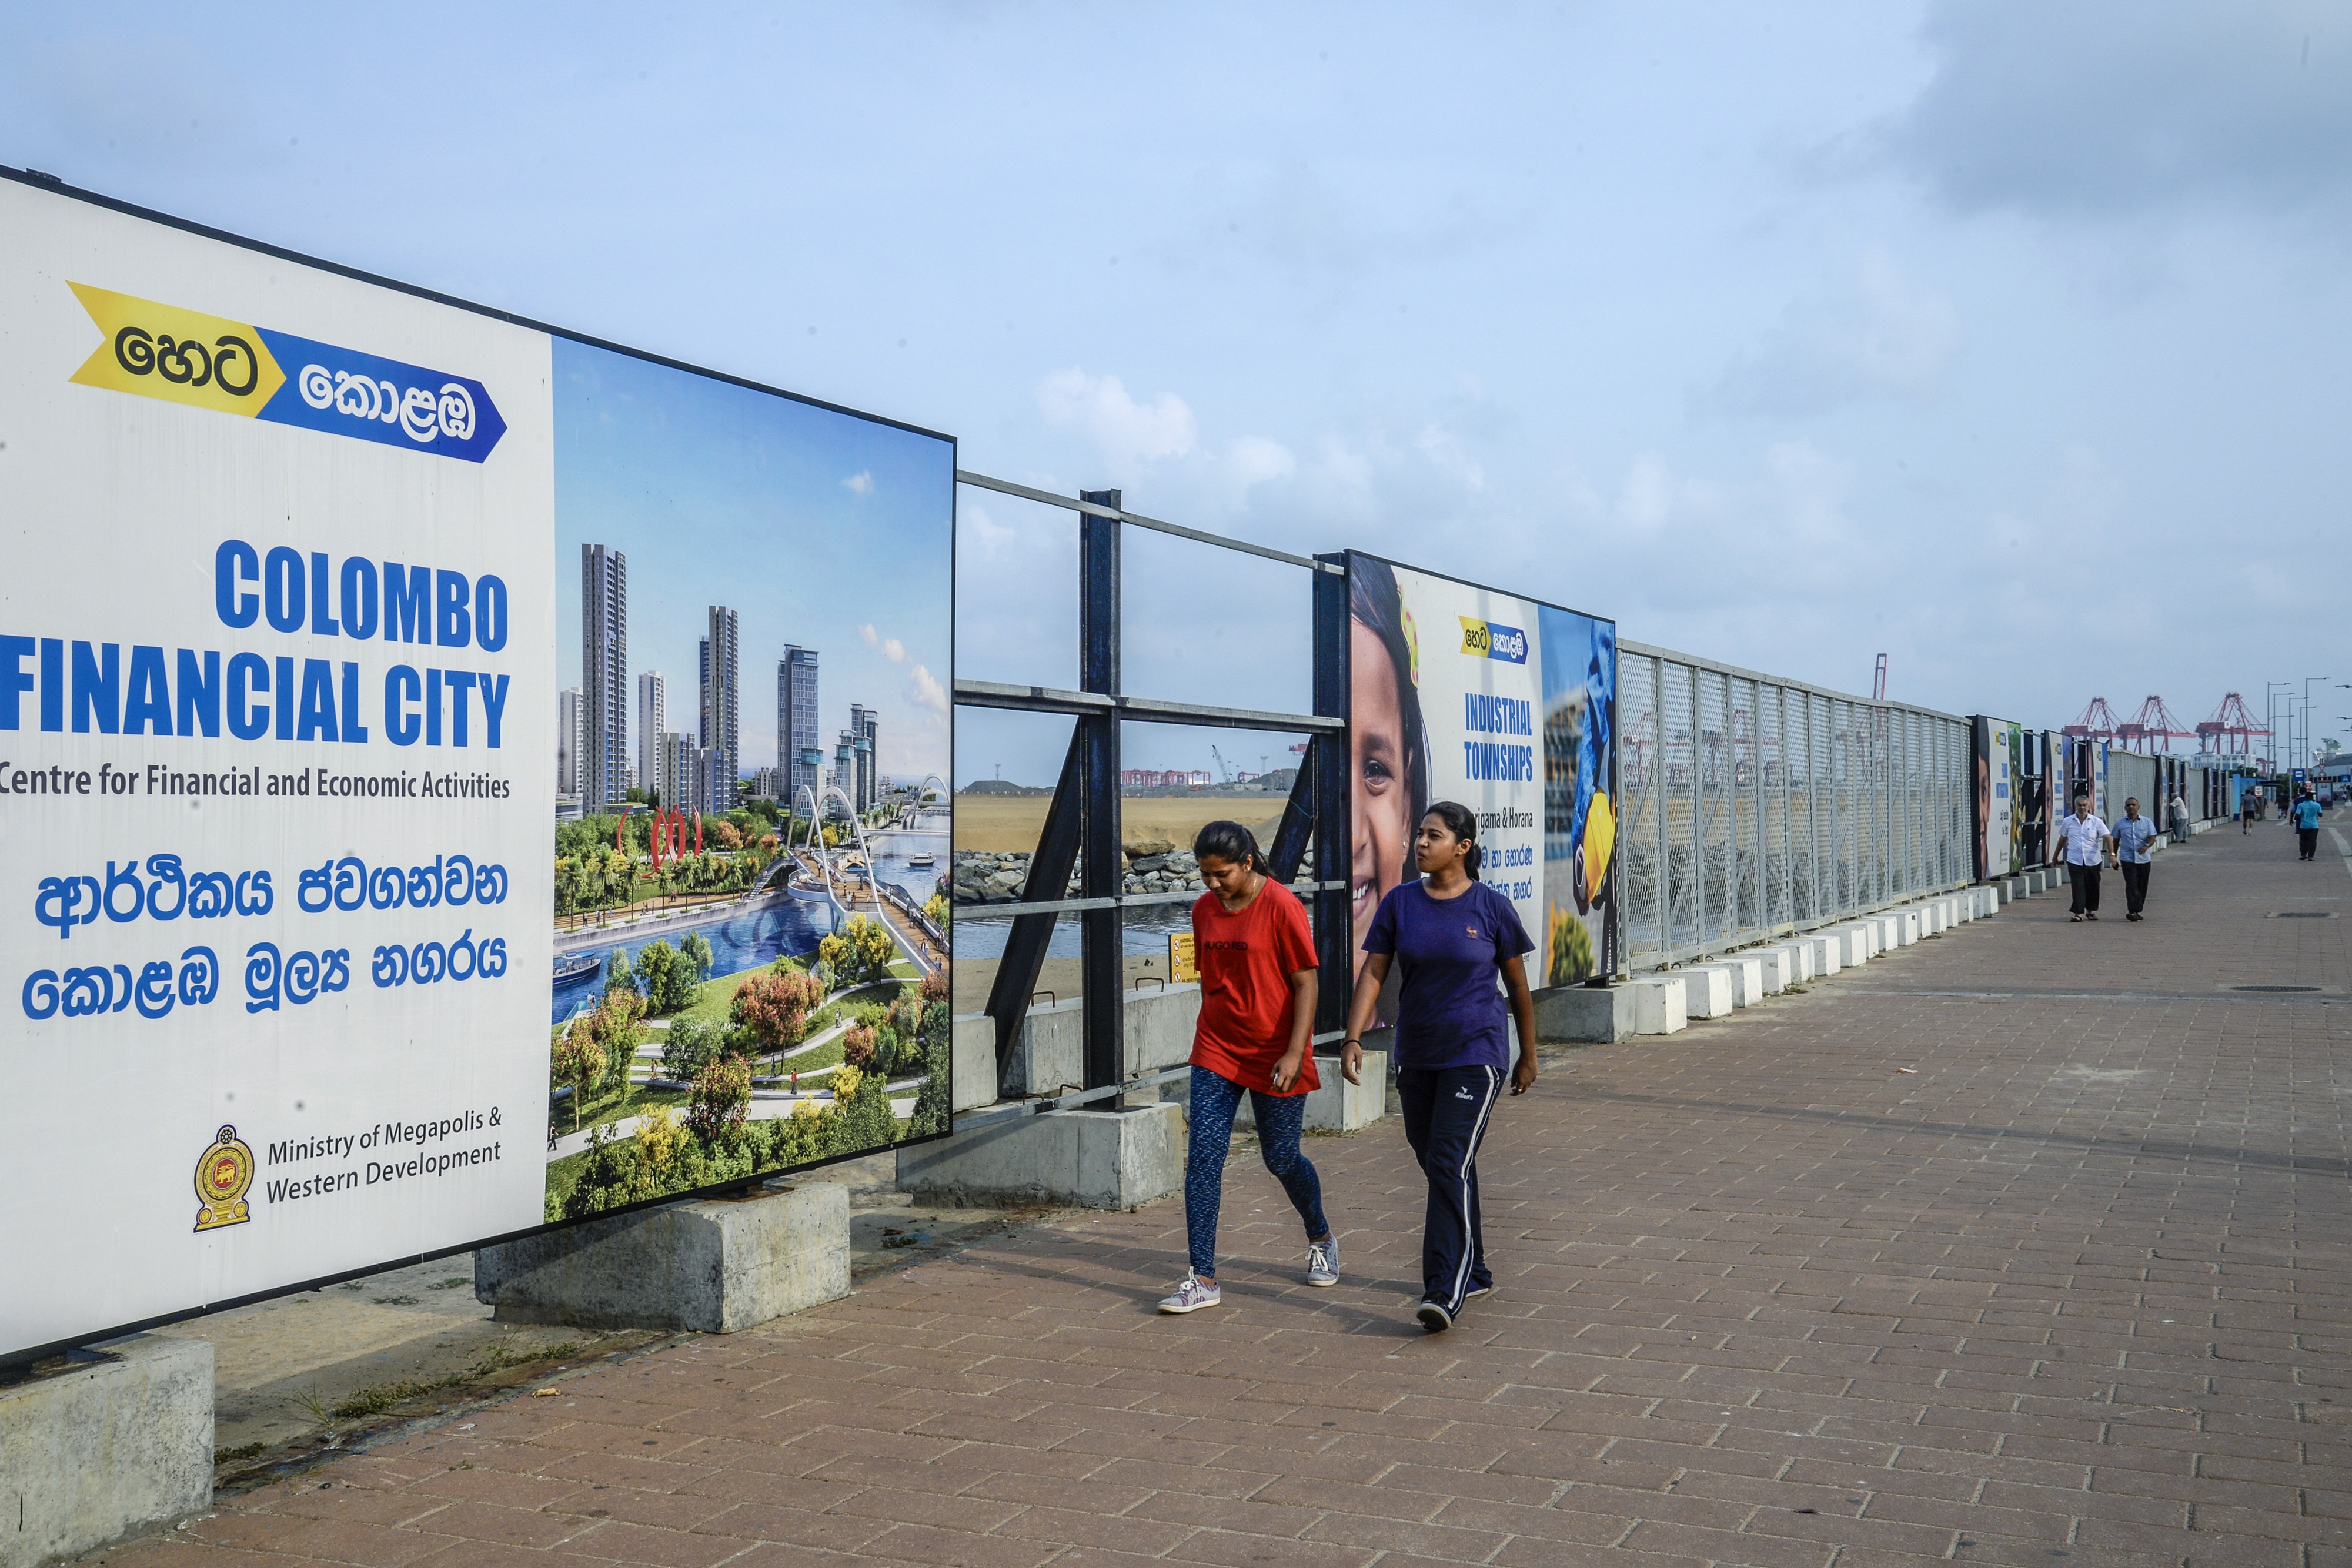 Pedestrians walk past signs for the Colombo International Financial City project in Colombo, Sri Lanka, on March 31. The Colombo Port City project is financed by China Harbour Engineering Company, as part of Chinese President Xi Jinping's Belt and Road Initiative. Photo: Bloomberg